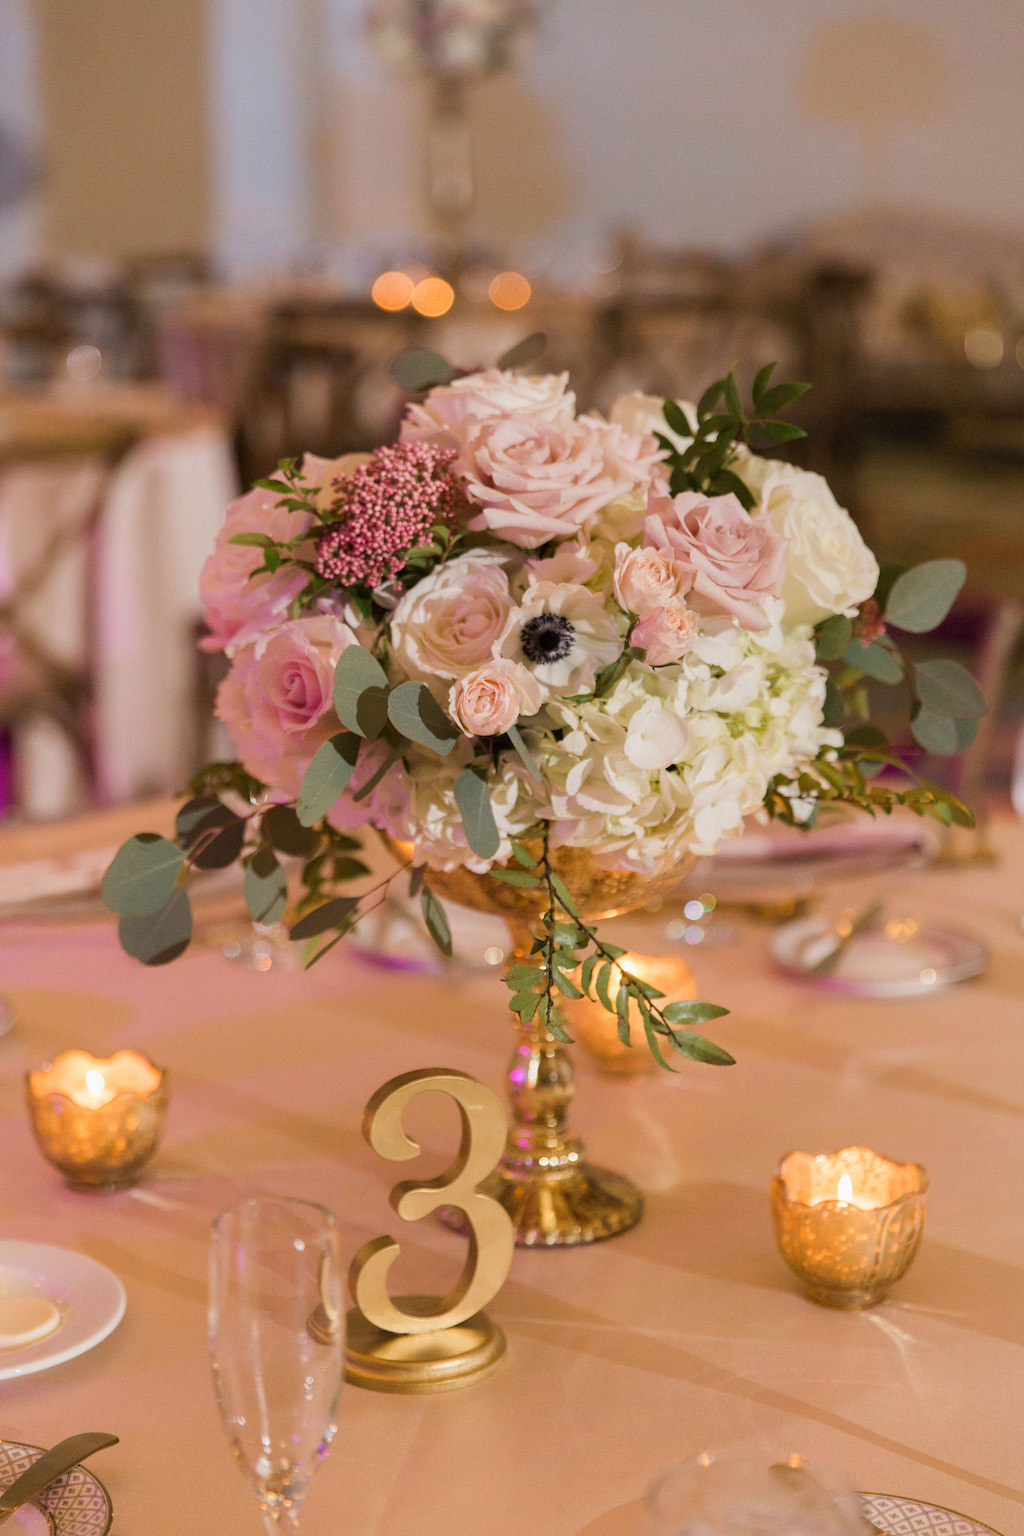 Low Pink Rose and White Anemone Centerpiece with Greenery in Gold Vase with Blush Pink Linens and Gold Votive Candle Holders and Stylish Gold Table Number | Tampa Bay Event Planner Parties A La Carte